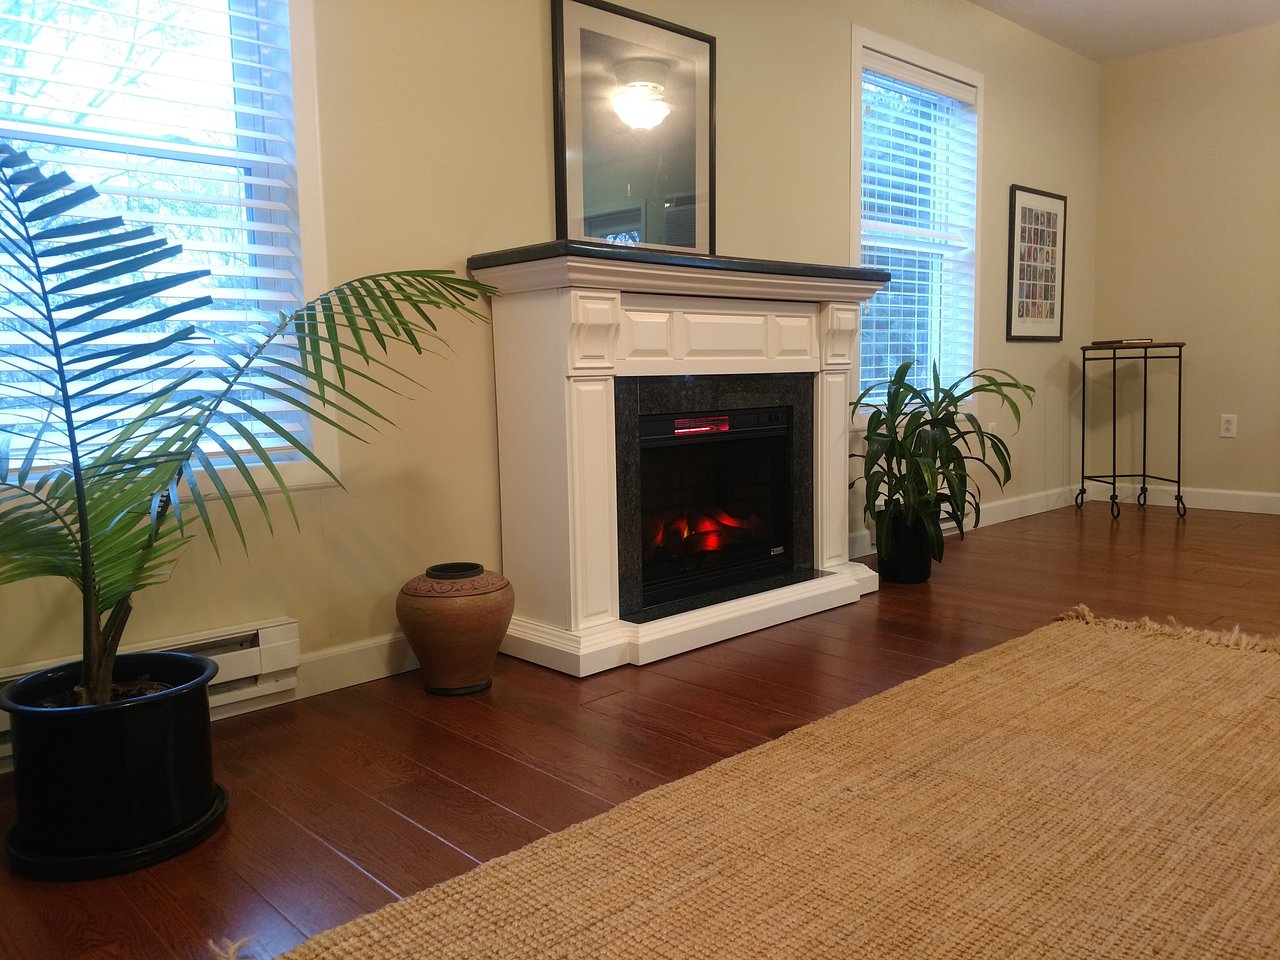 American Heritage Fireplace Awesome Harbor Hill Inn Updated 2019 Reviews Pepin Wi Tripadvisor